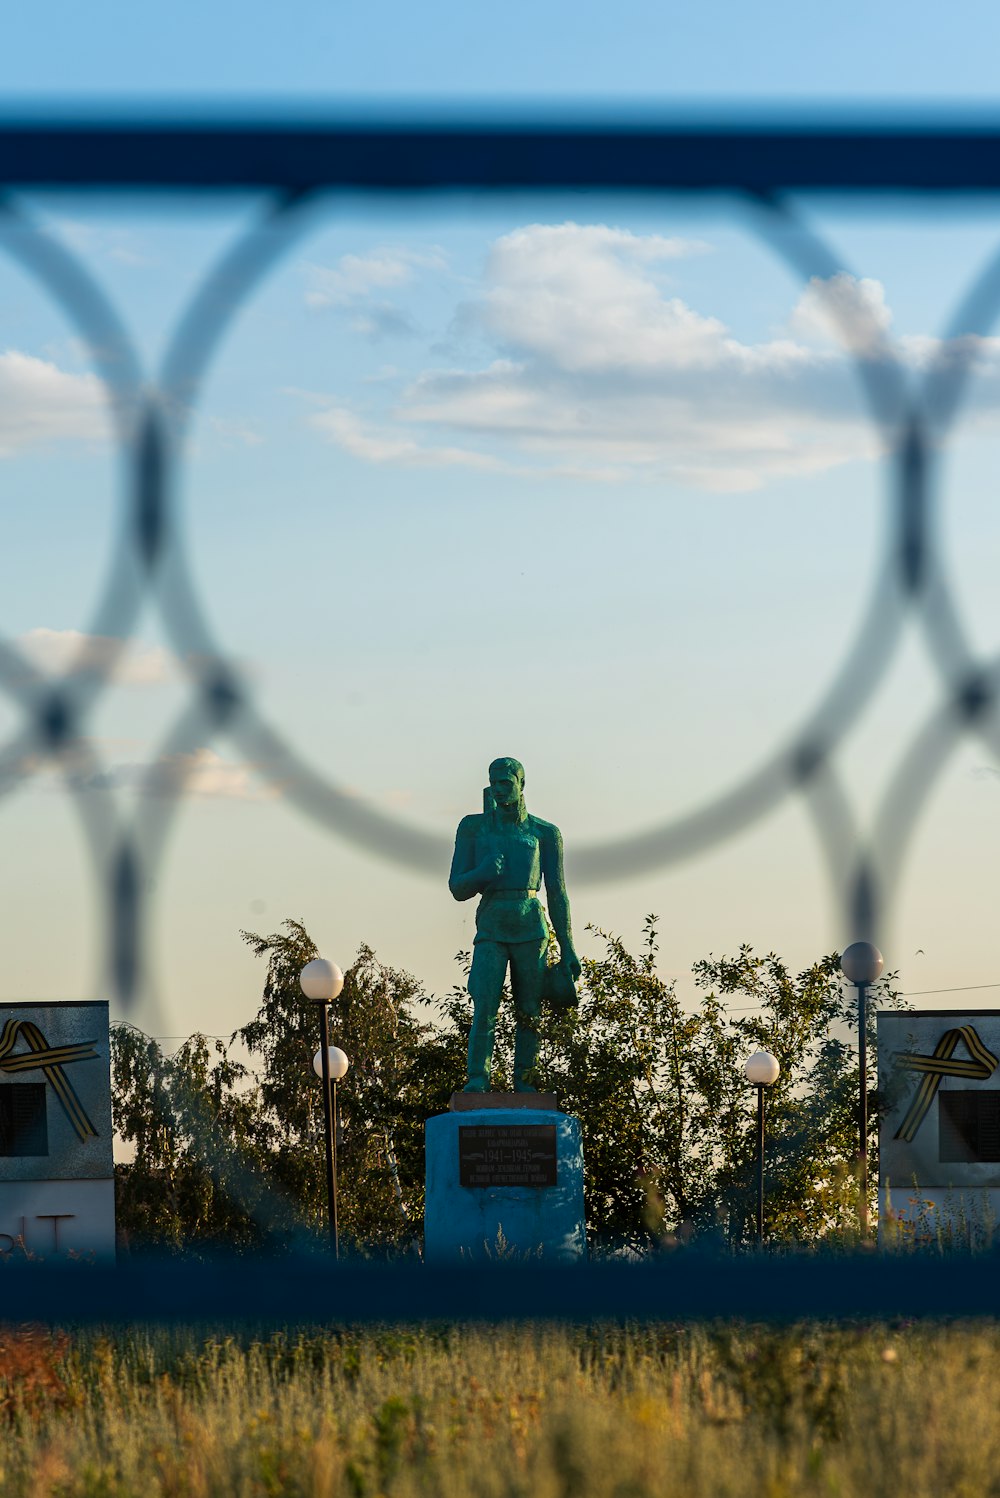 a statue of a man is seen through a fence